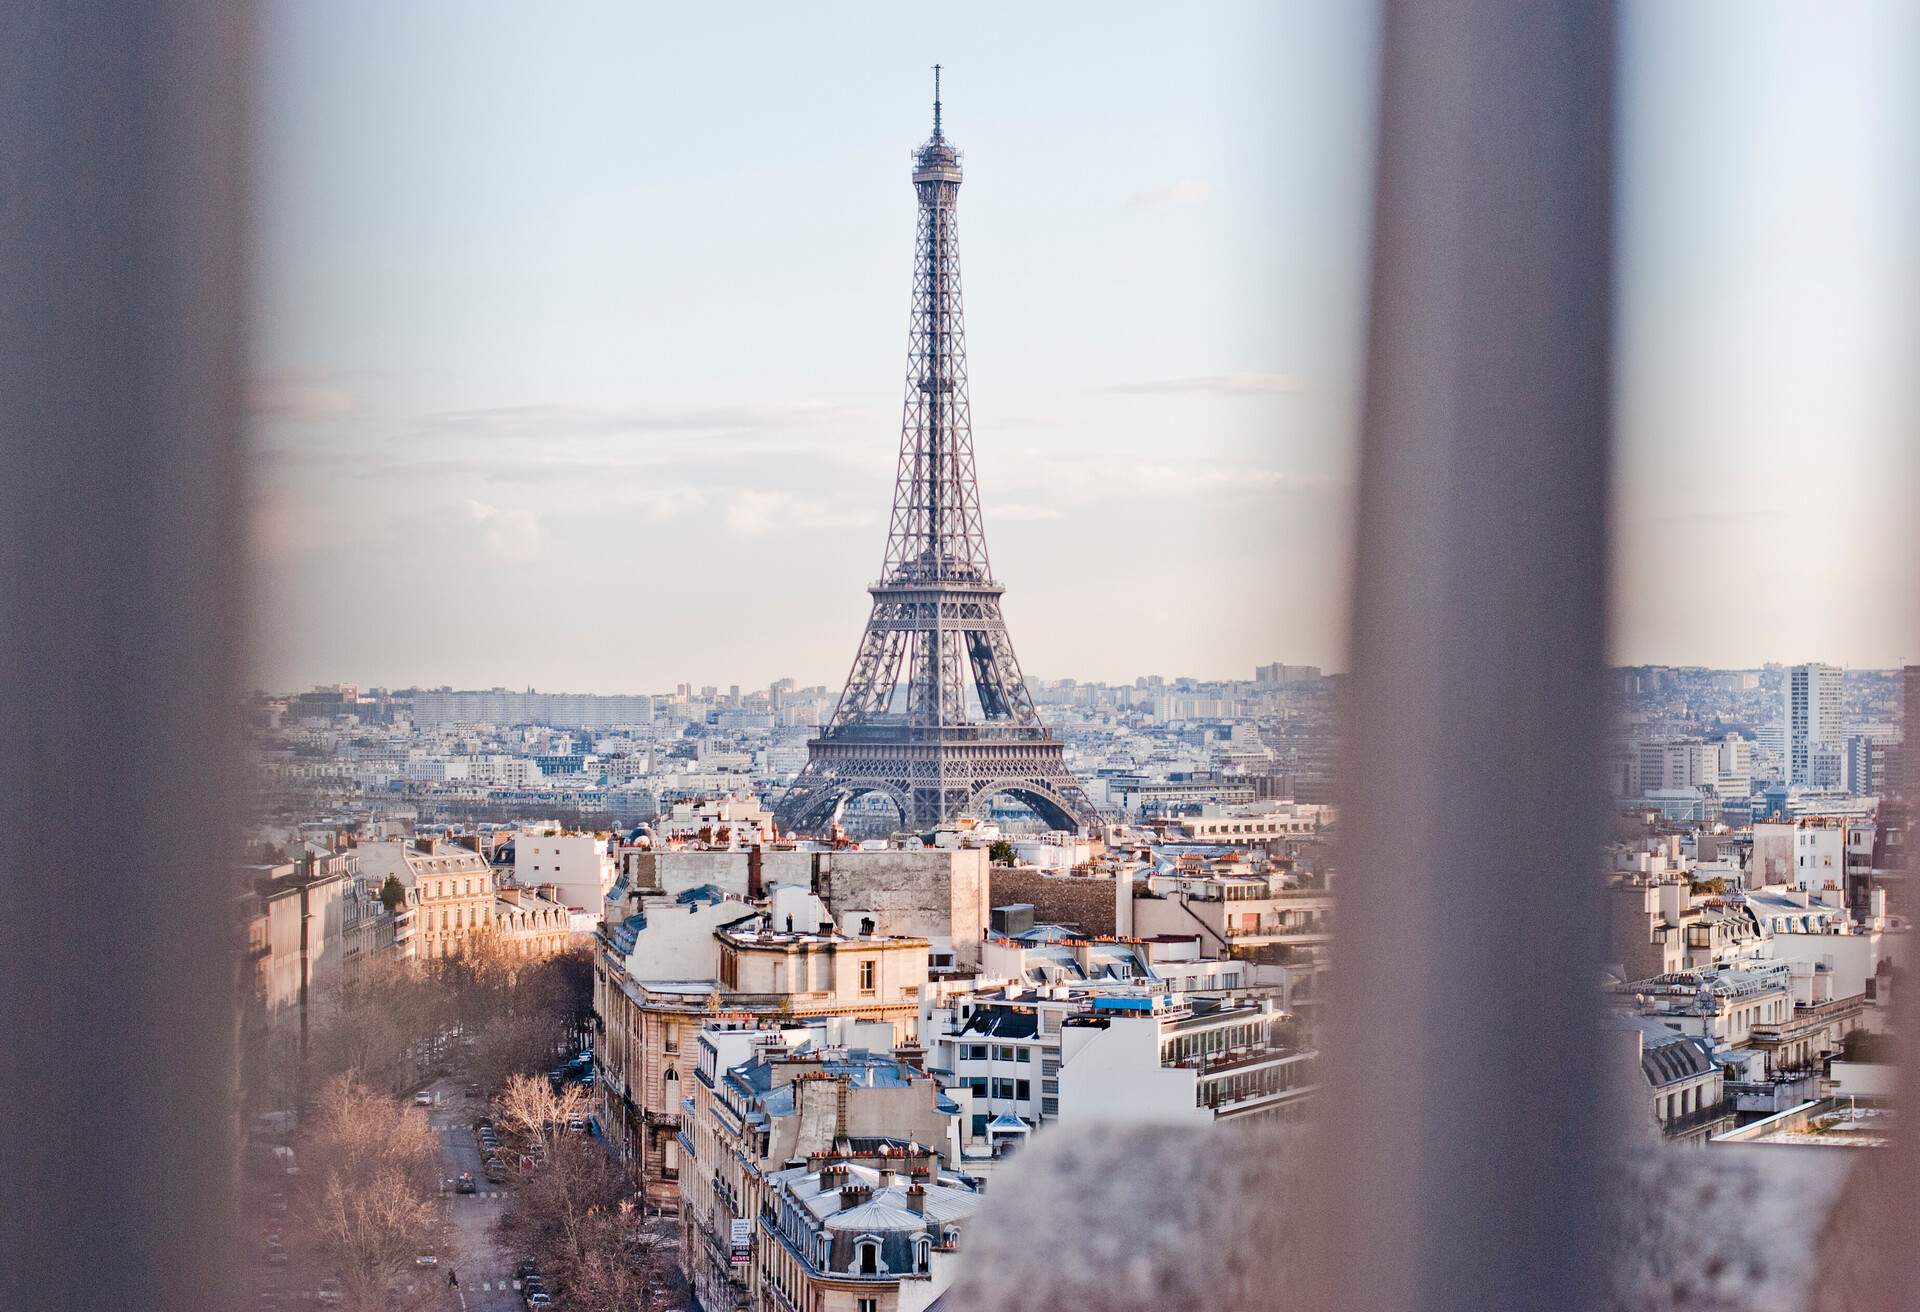 The Eiffel Tower rises above the cityscape.